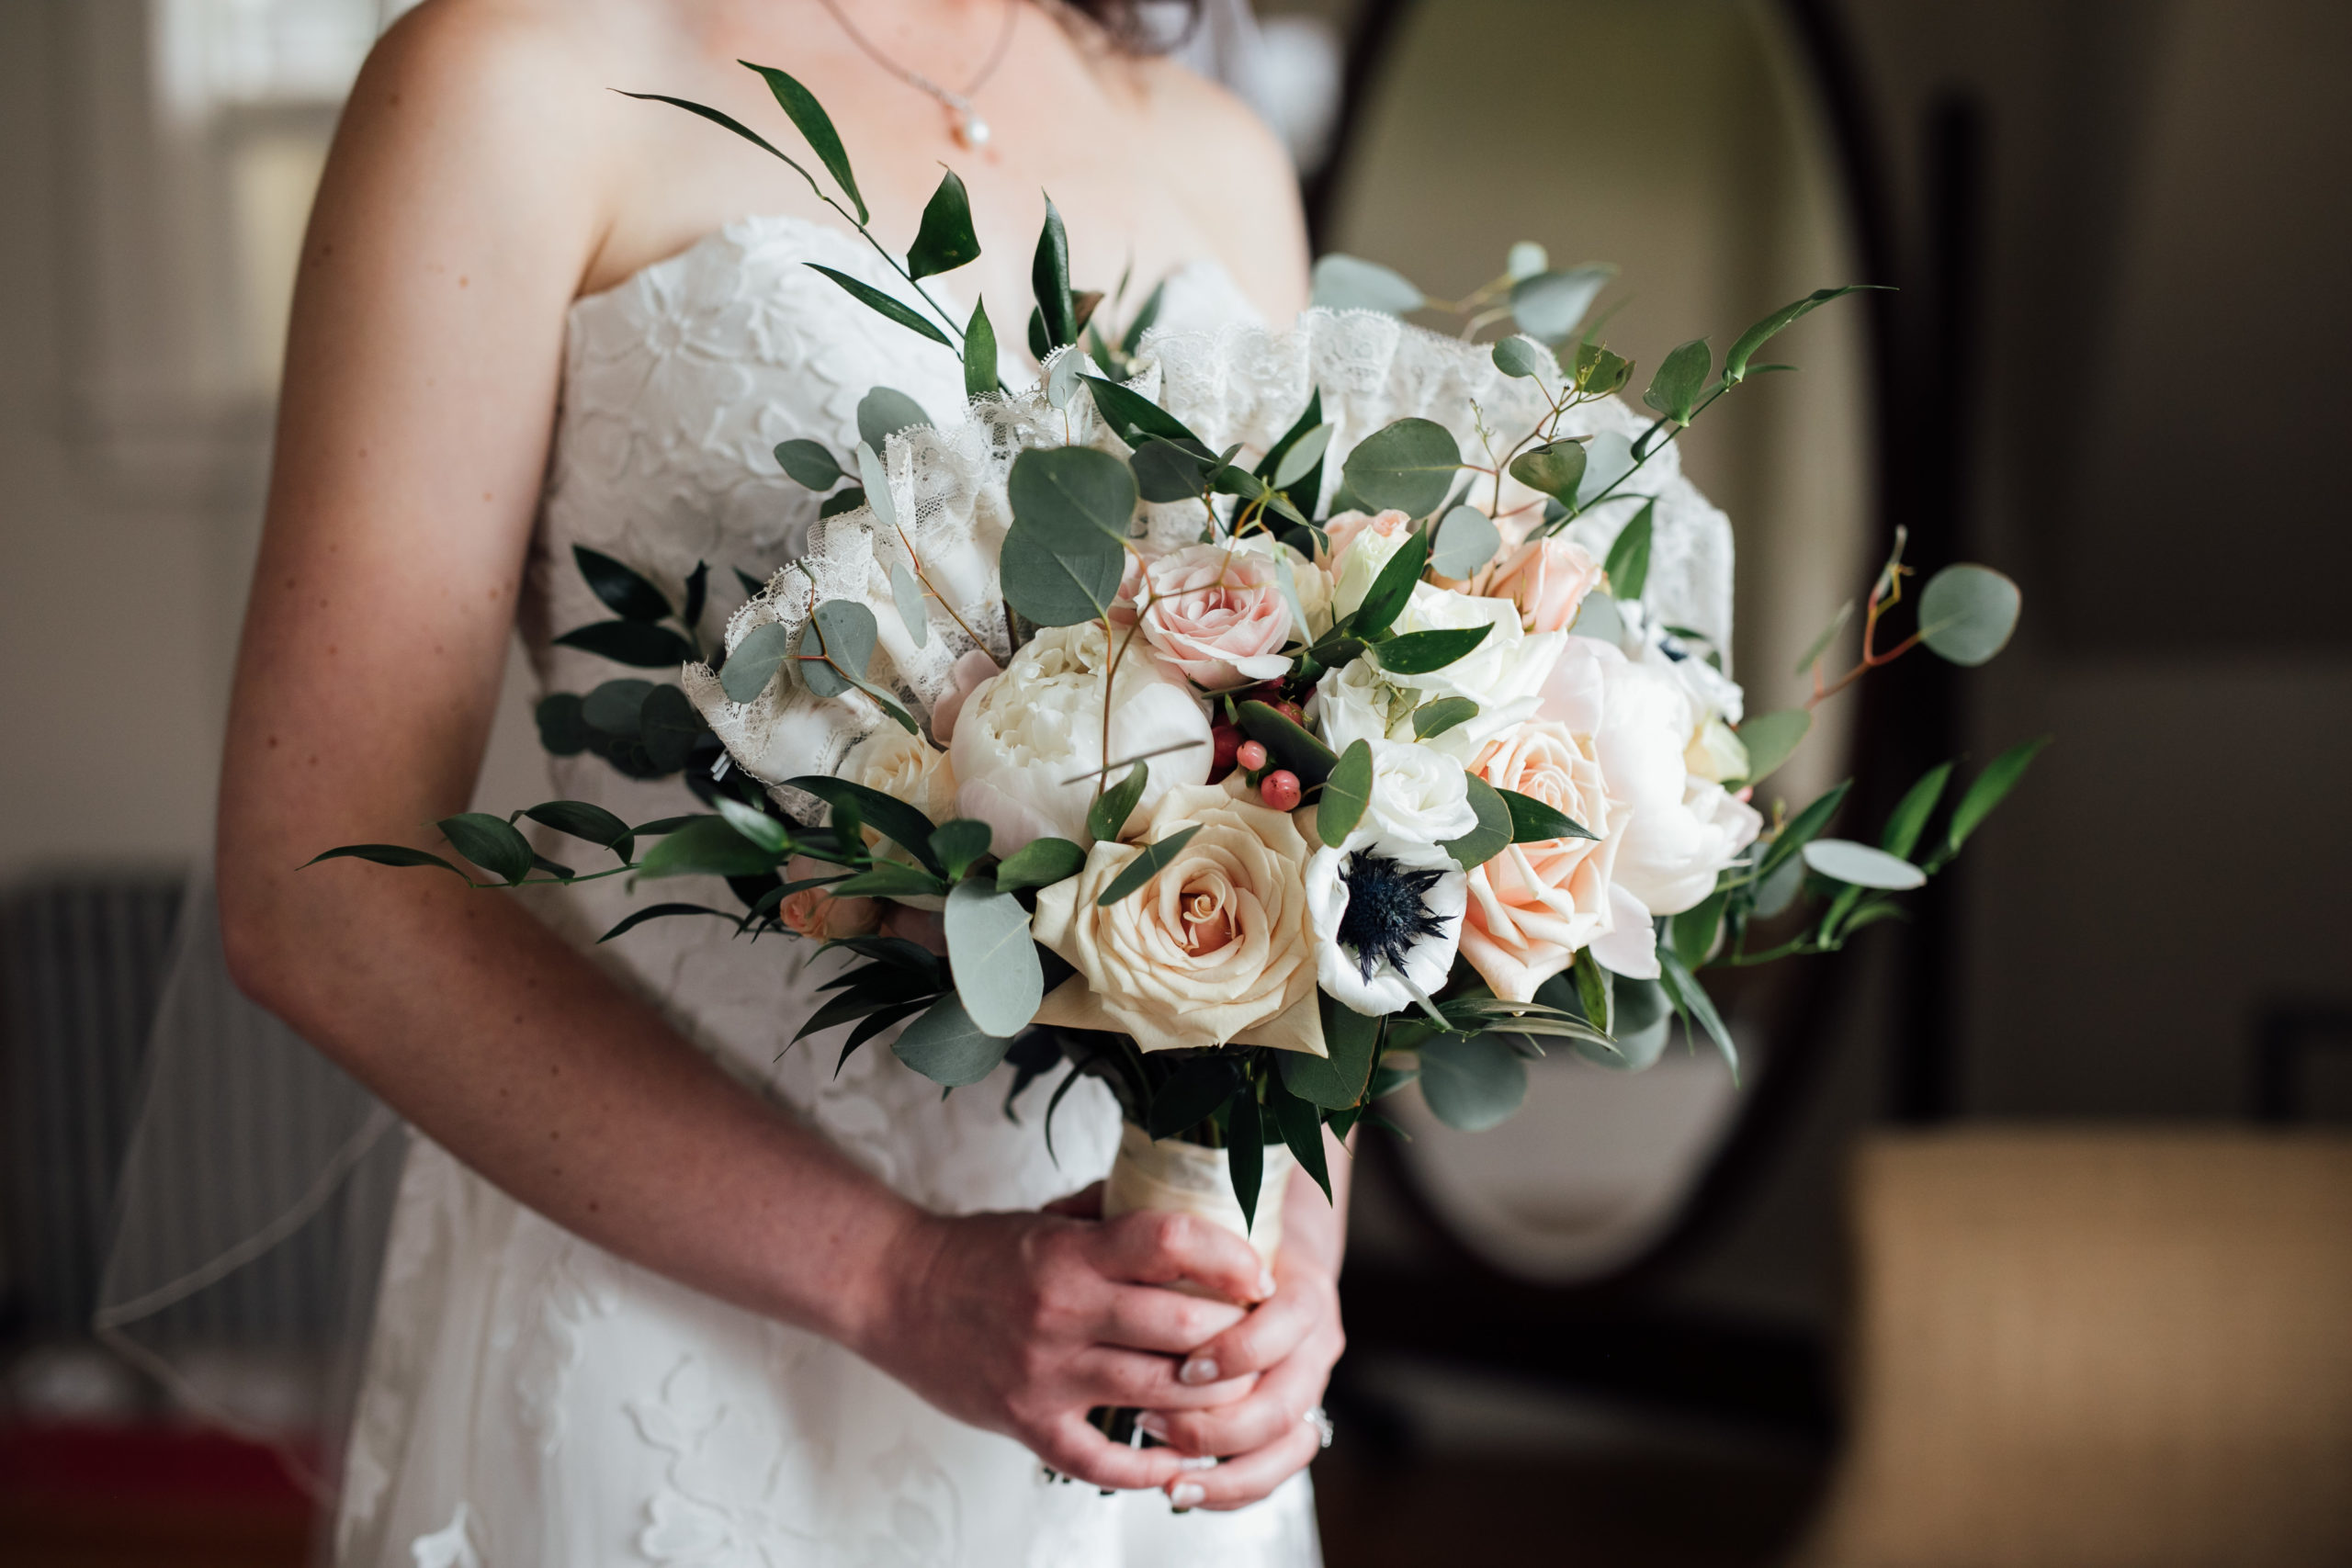 Wedding Bouquets: Your Perfect Size and Style